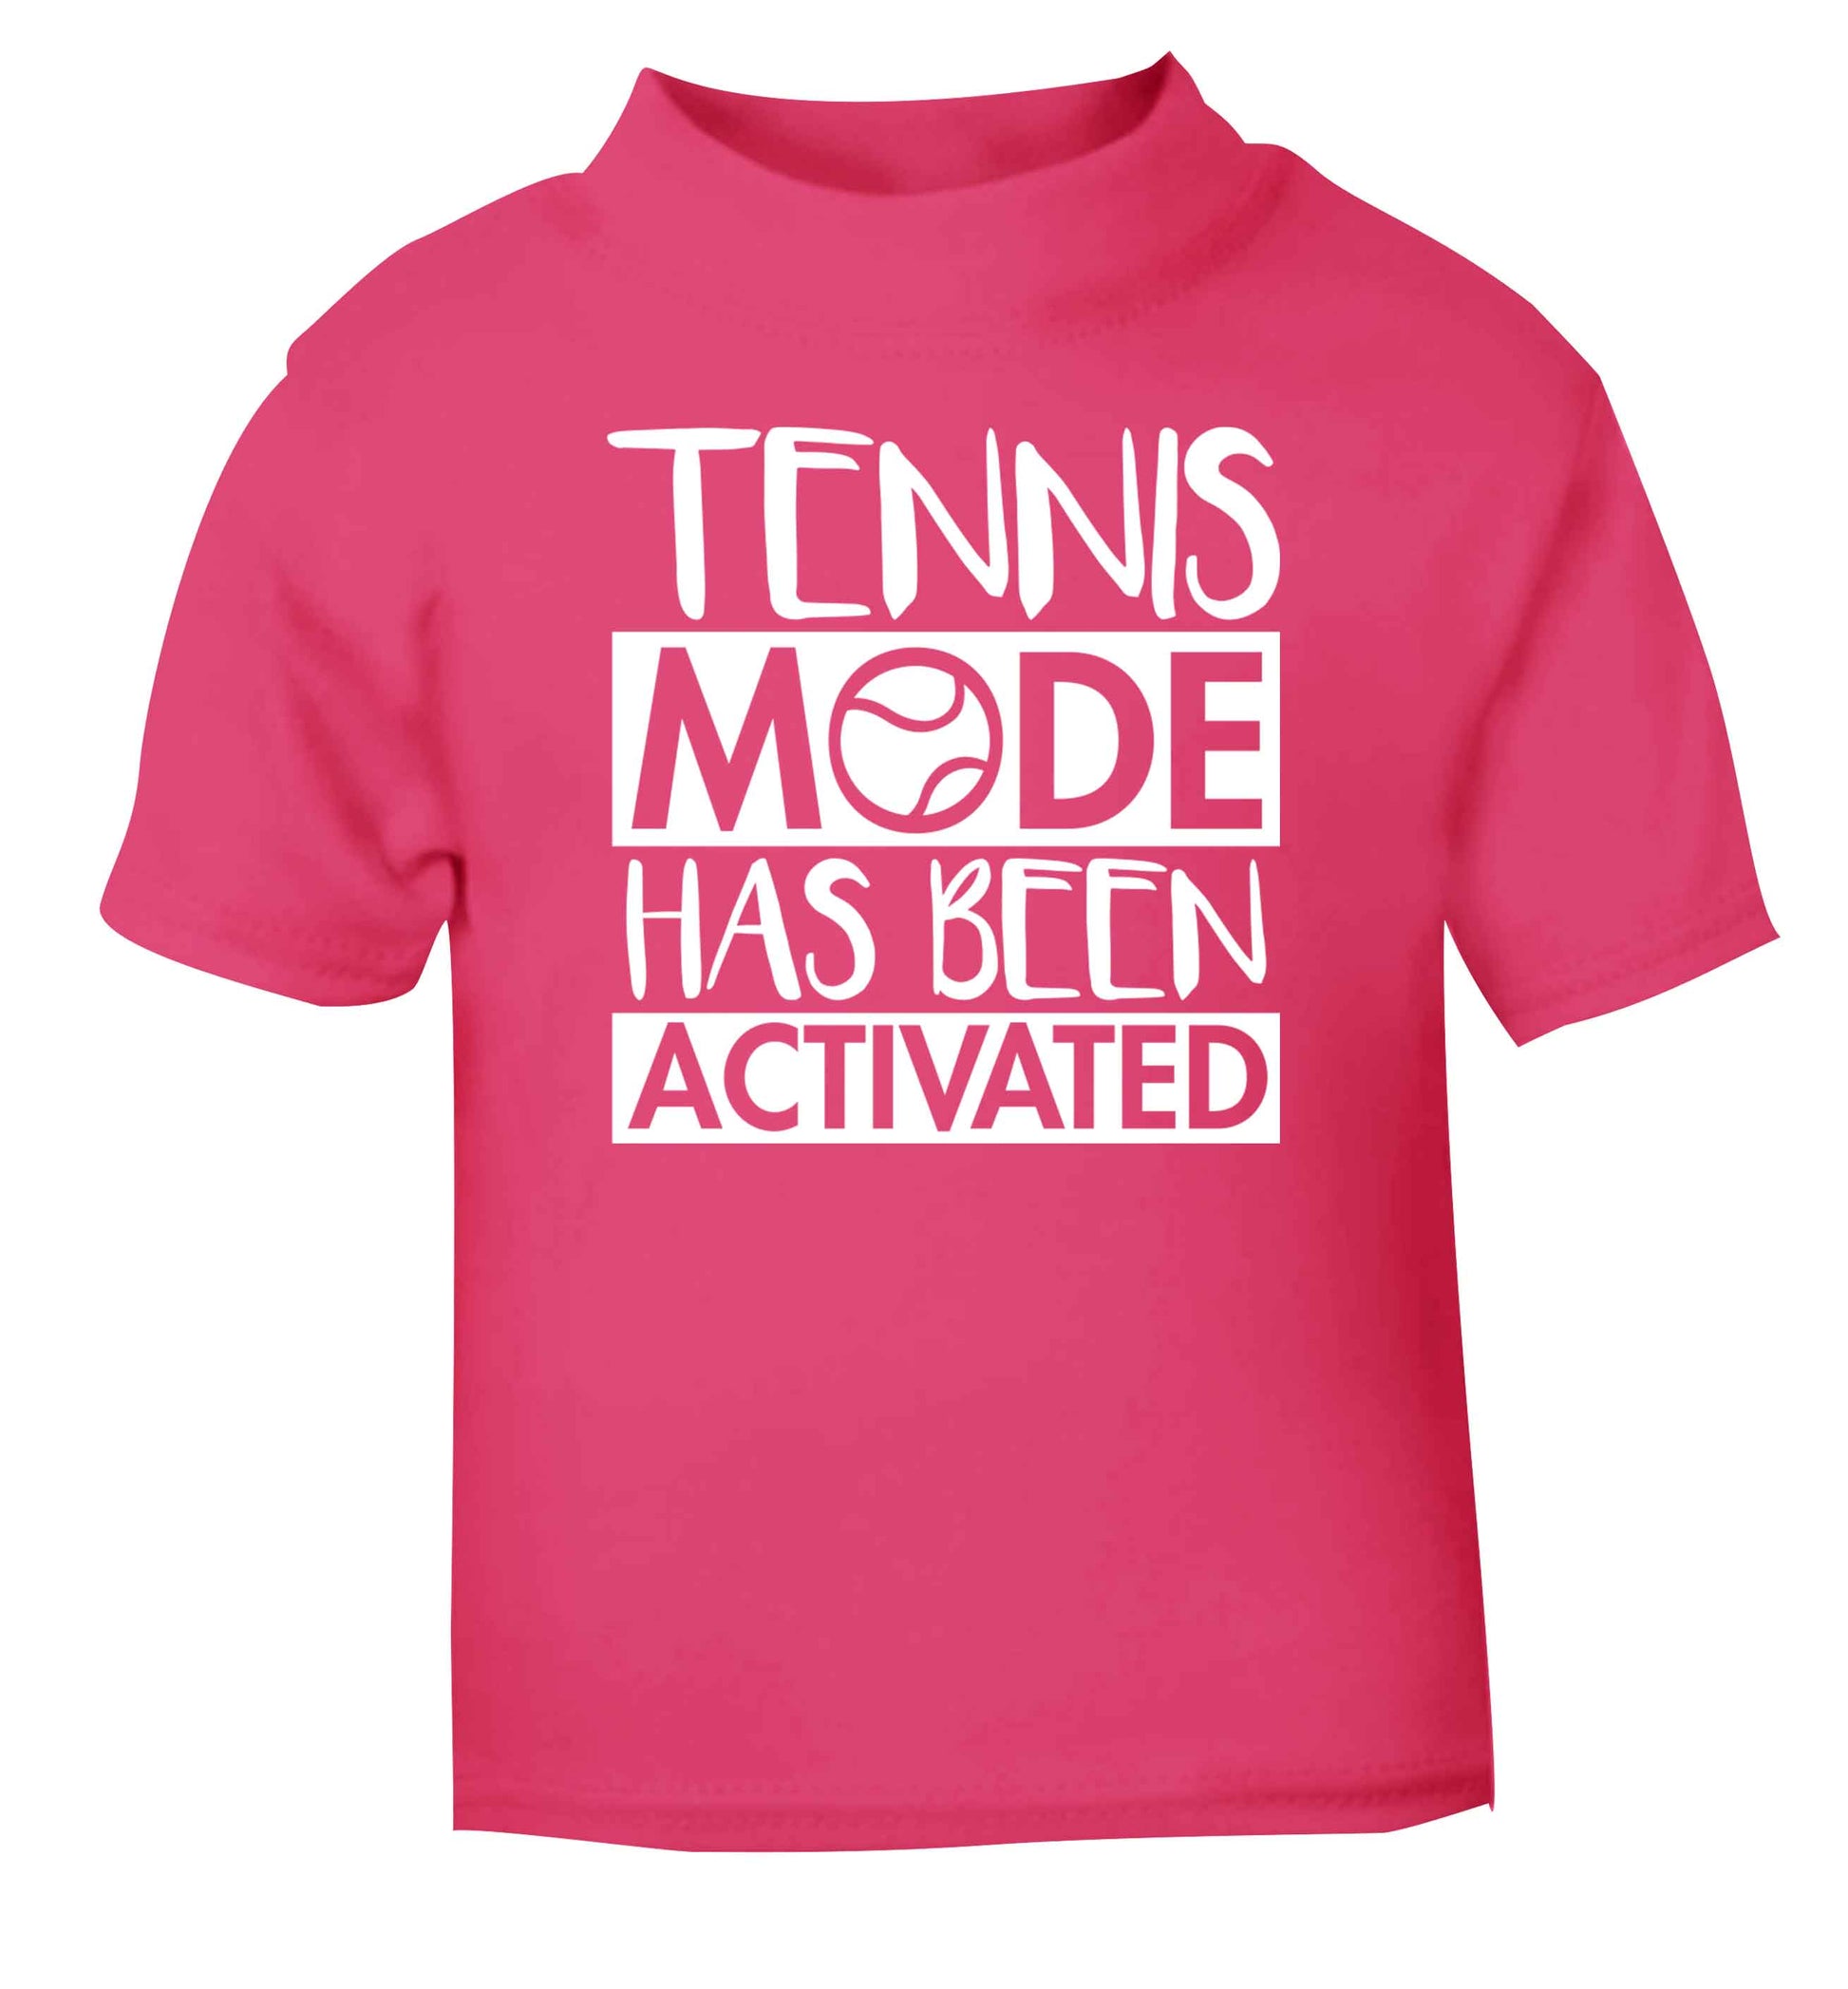 Tennis mode has been activated pink Baby Toddler Tshirt 2 Years